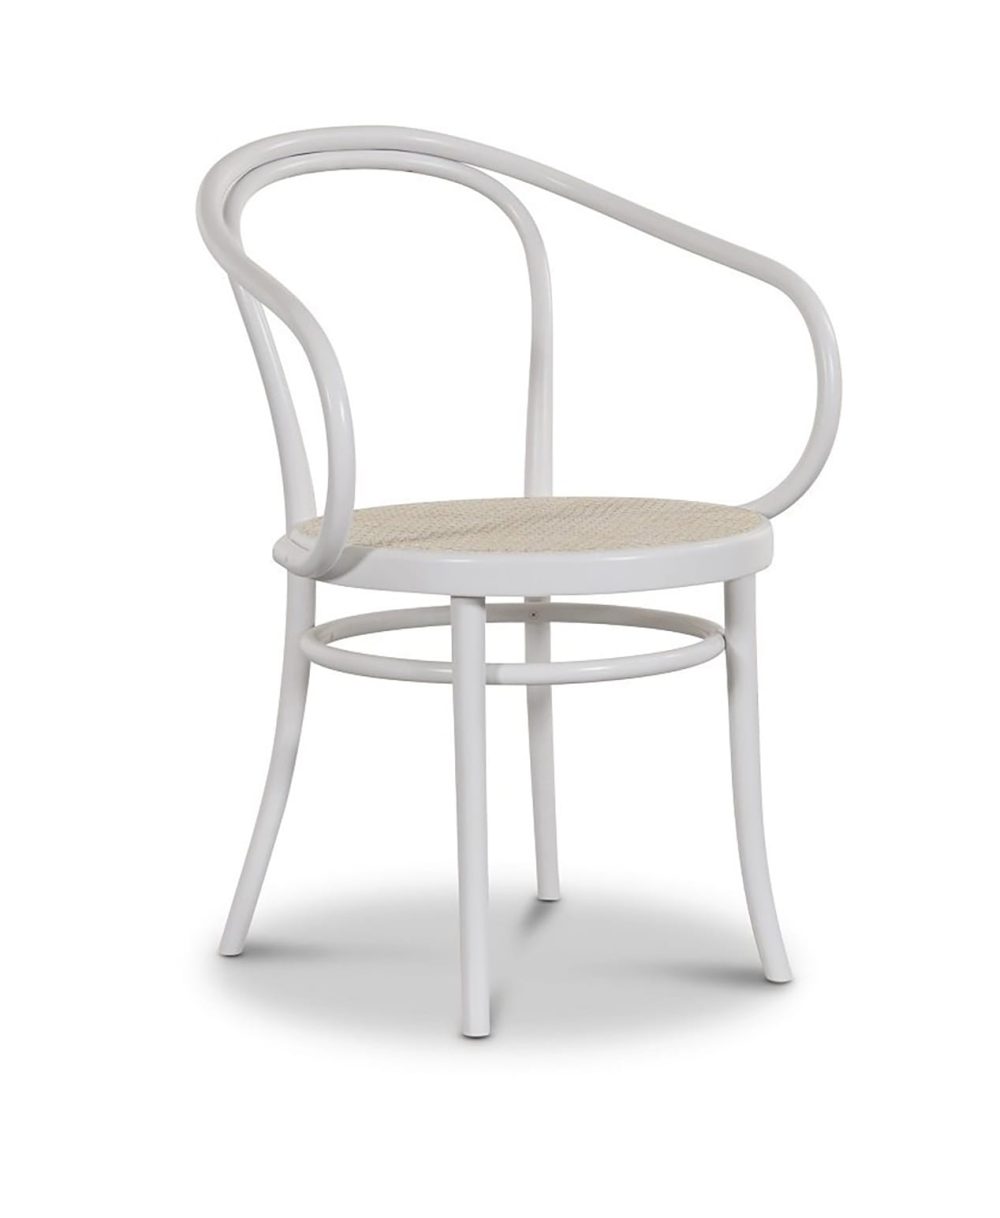 curved-no30-chair-white-profile.jpg